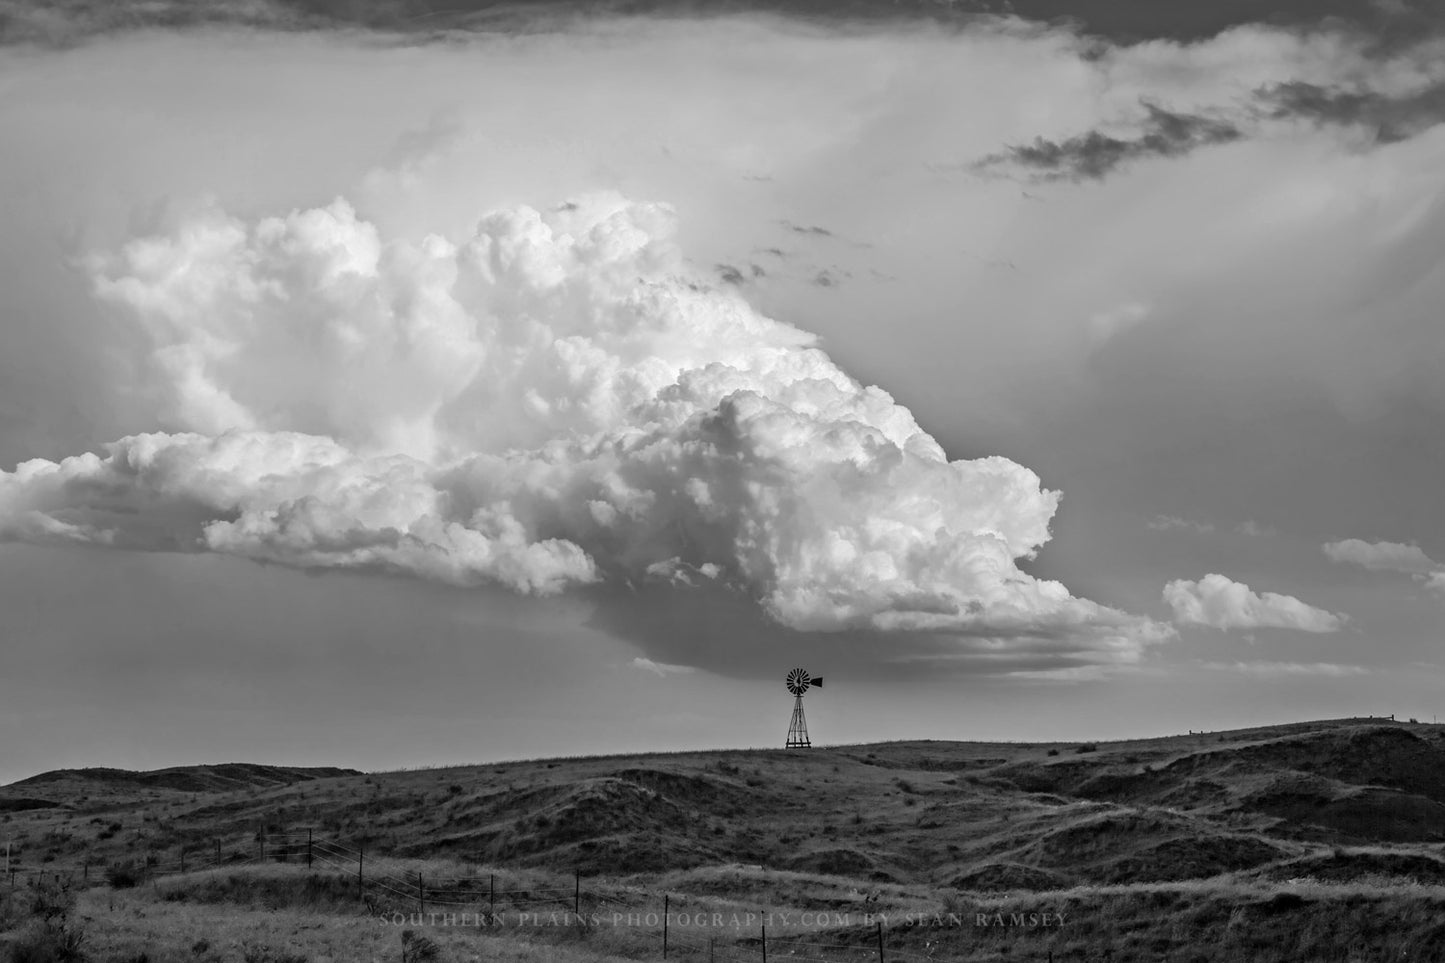 Western photography print of a storm cloud over a windmill on the Nebraska prairie in black and white by Sean Ramsey of Southern Plains Photography.